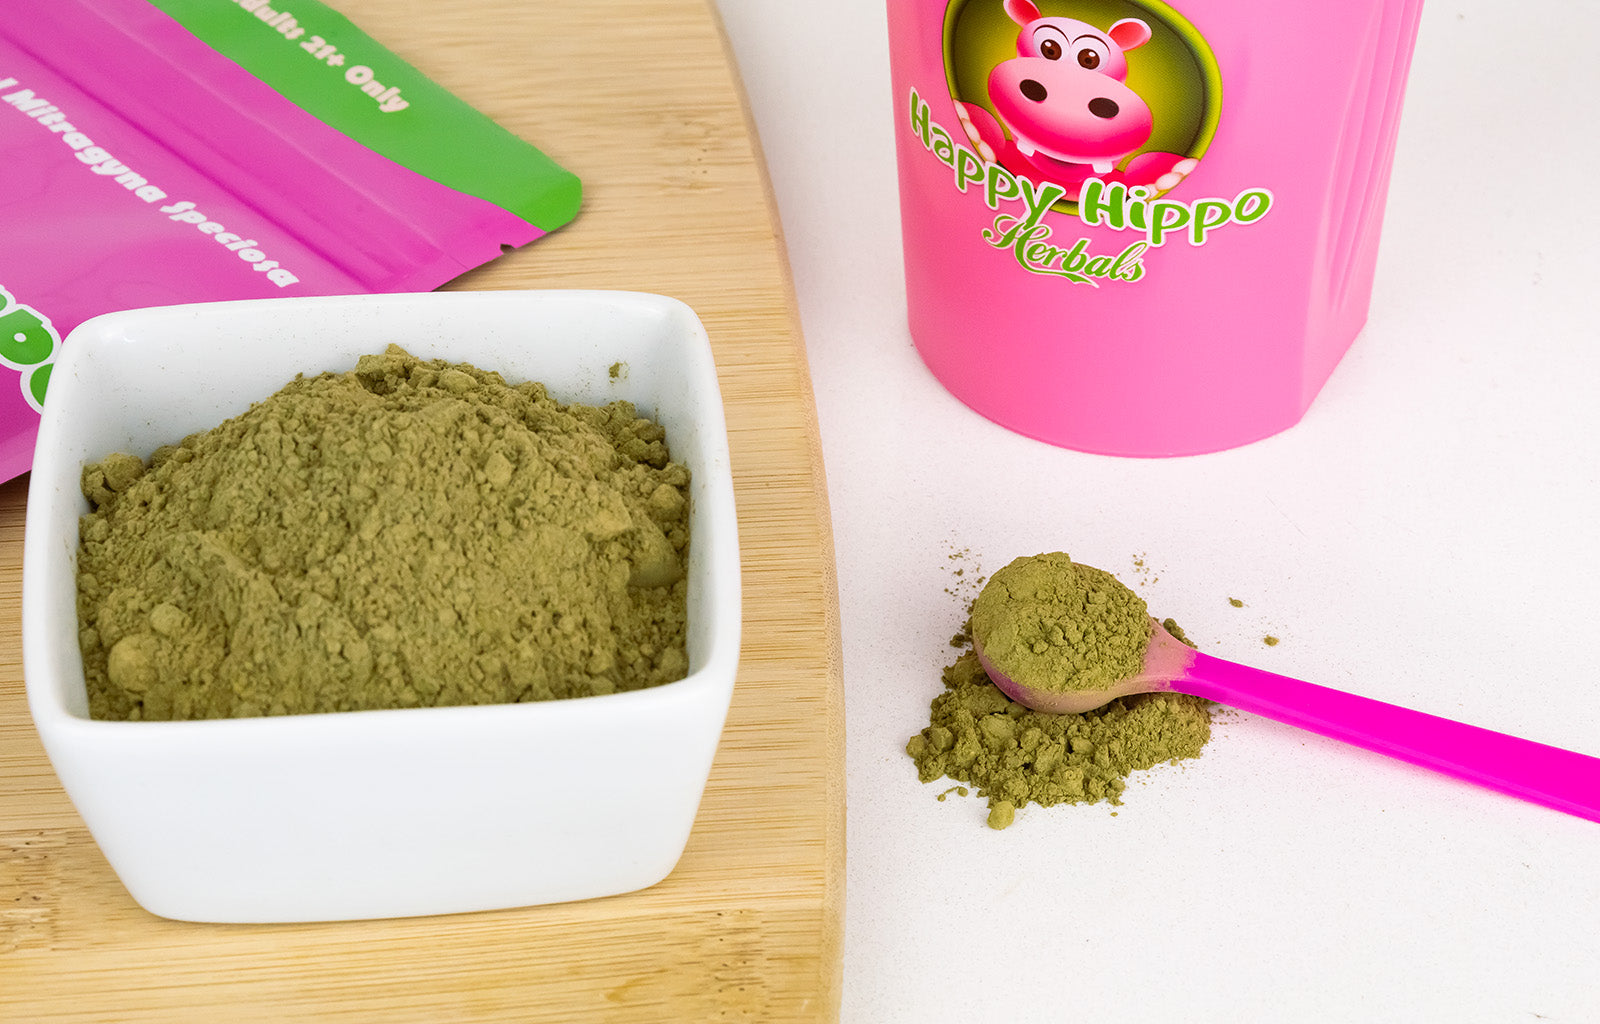 Featured image depicting a large bowl of Green Malay Kratom Powder, next to which sits a 1-gram little pink measuring scoop, and a Happy Hippo brand smoothie shaker.